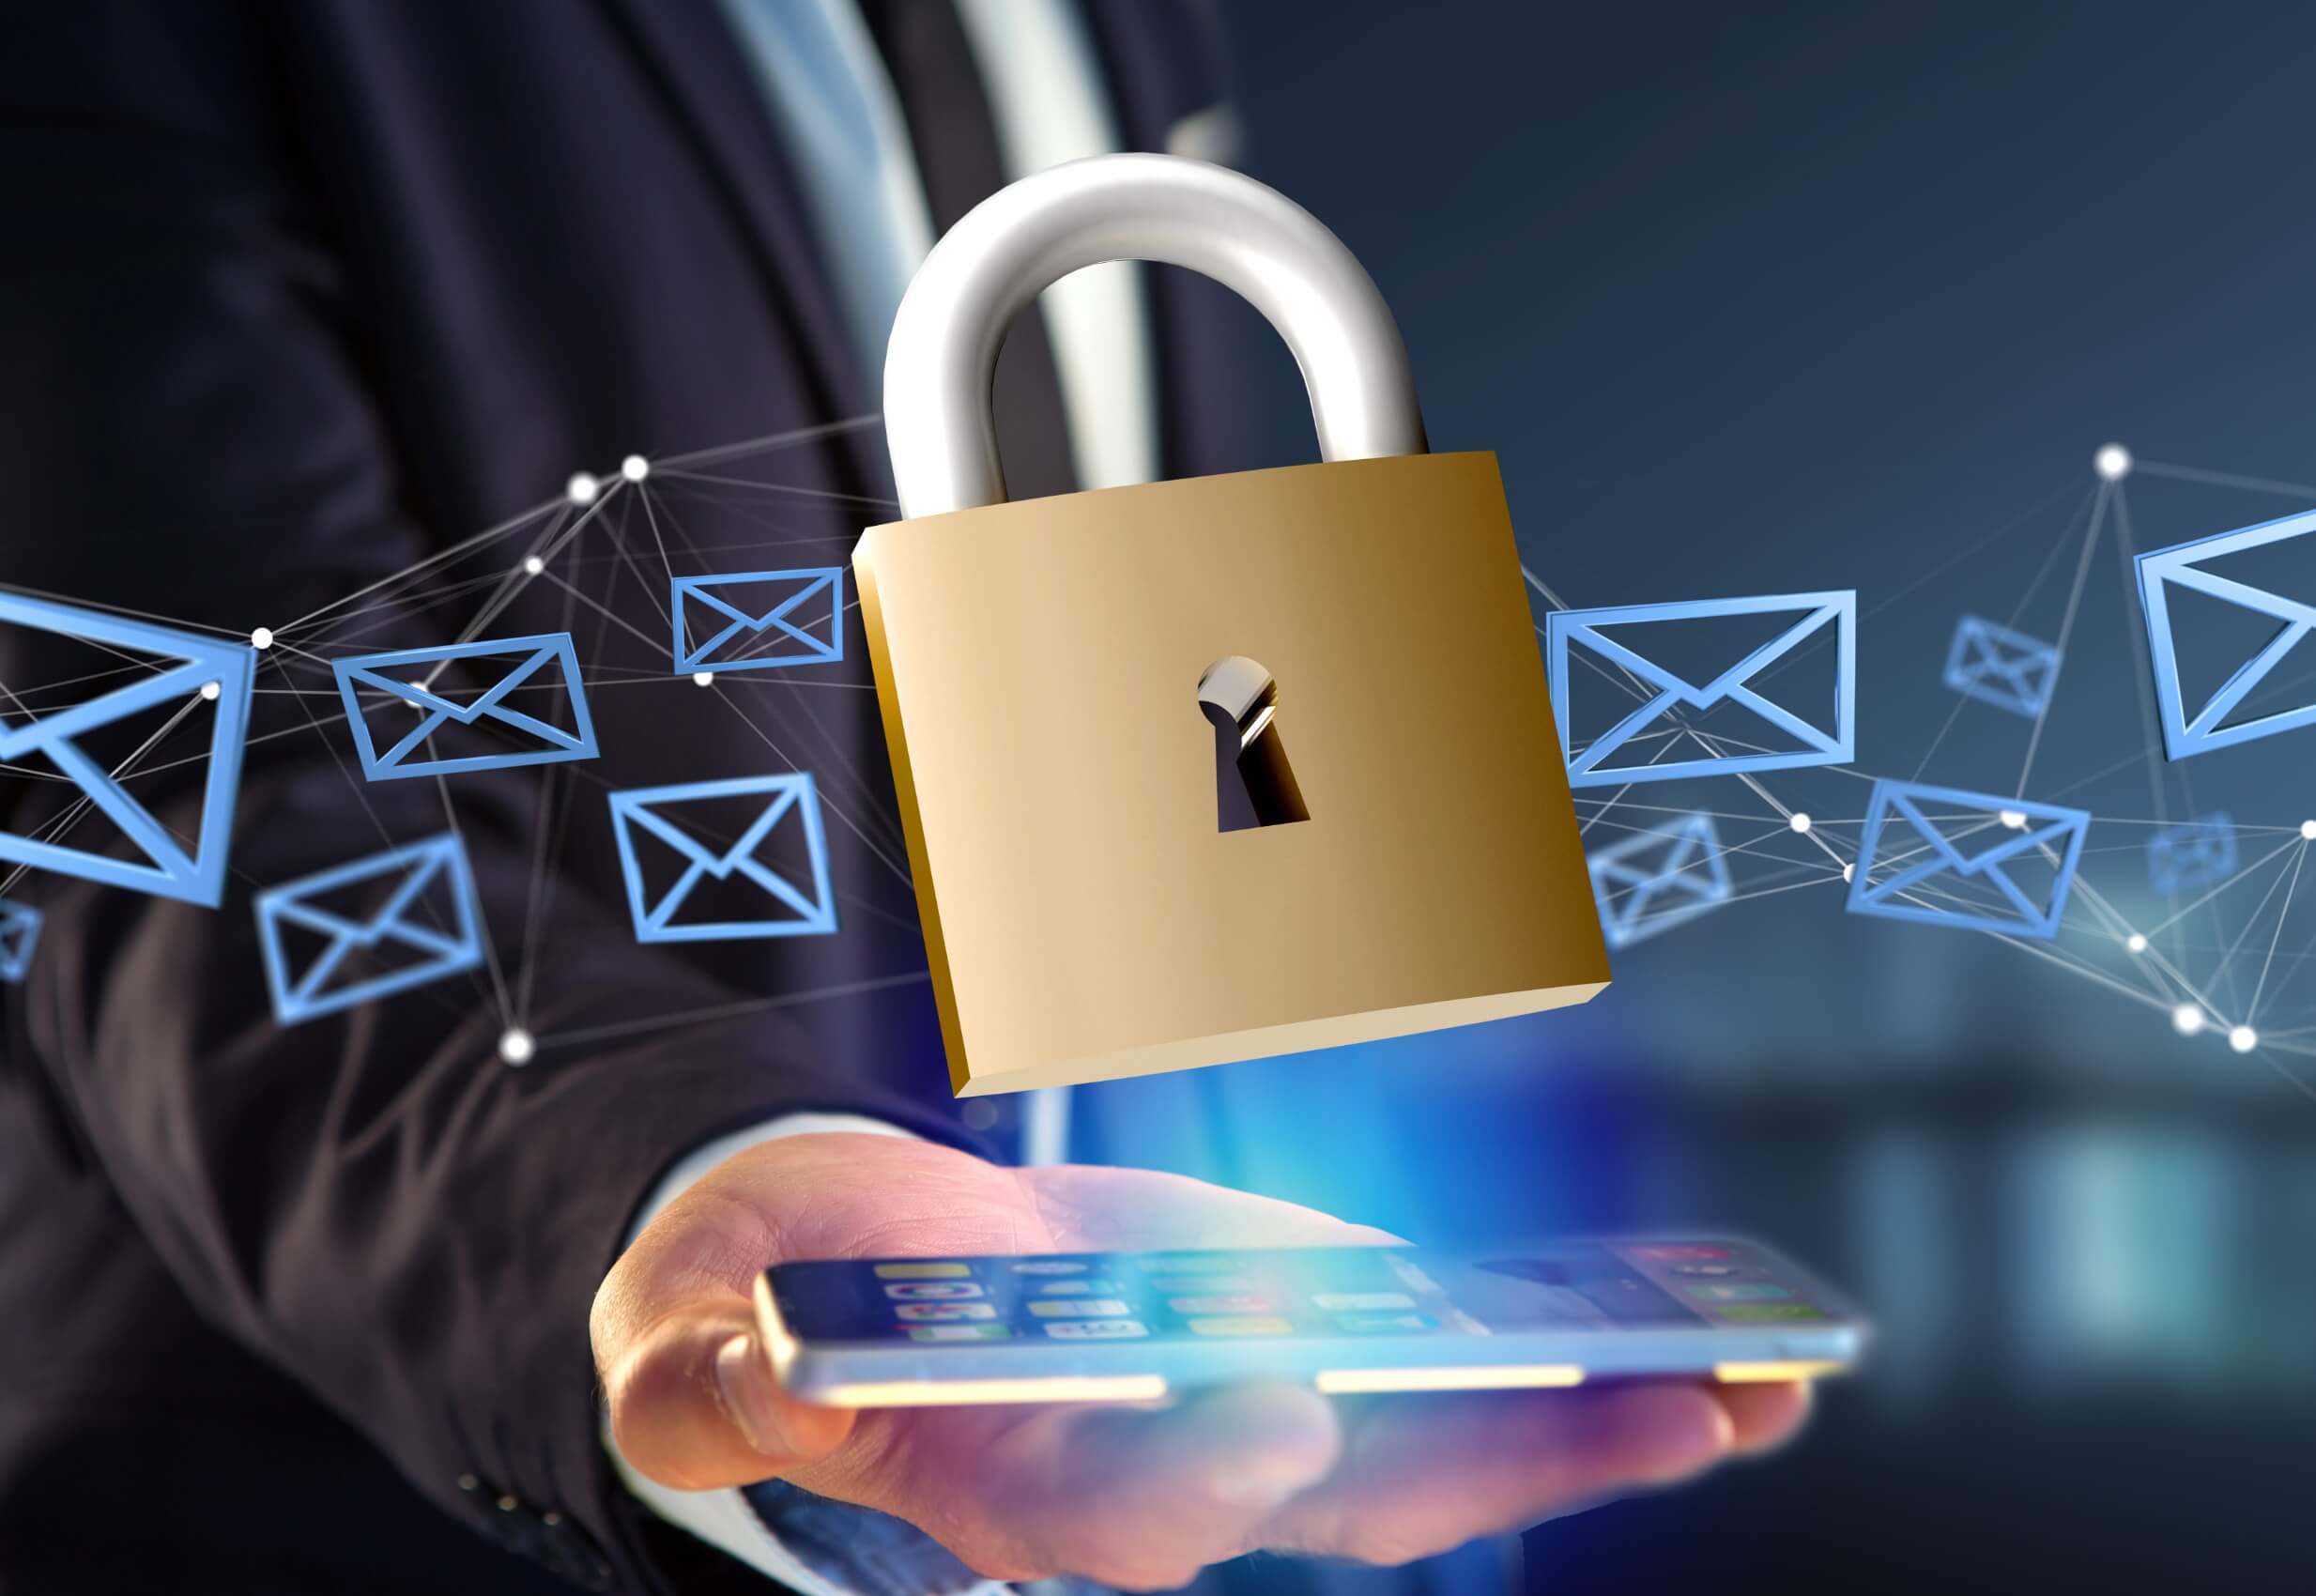 Mitigating Cybersecurity Risks In Business Communications